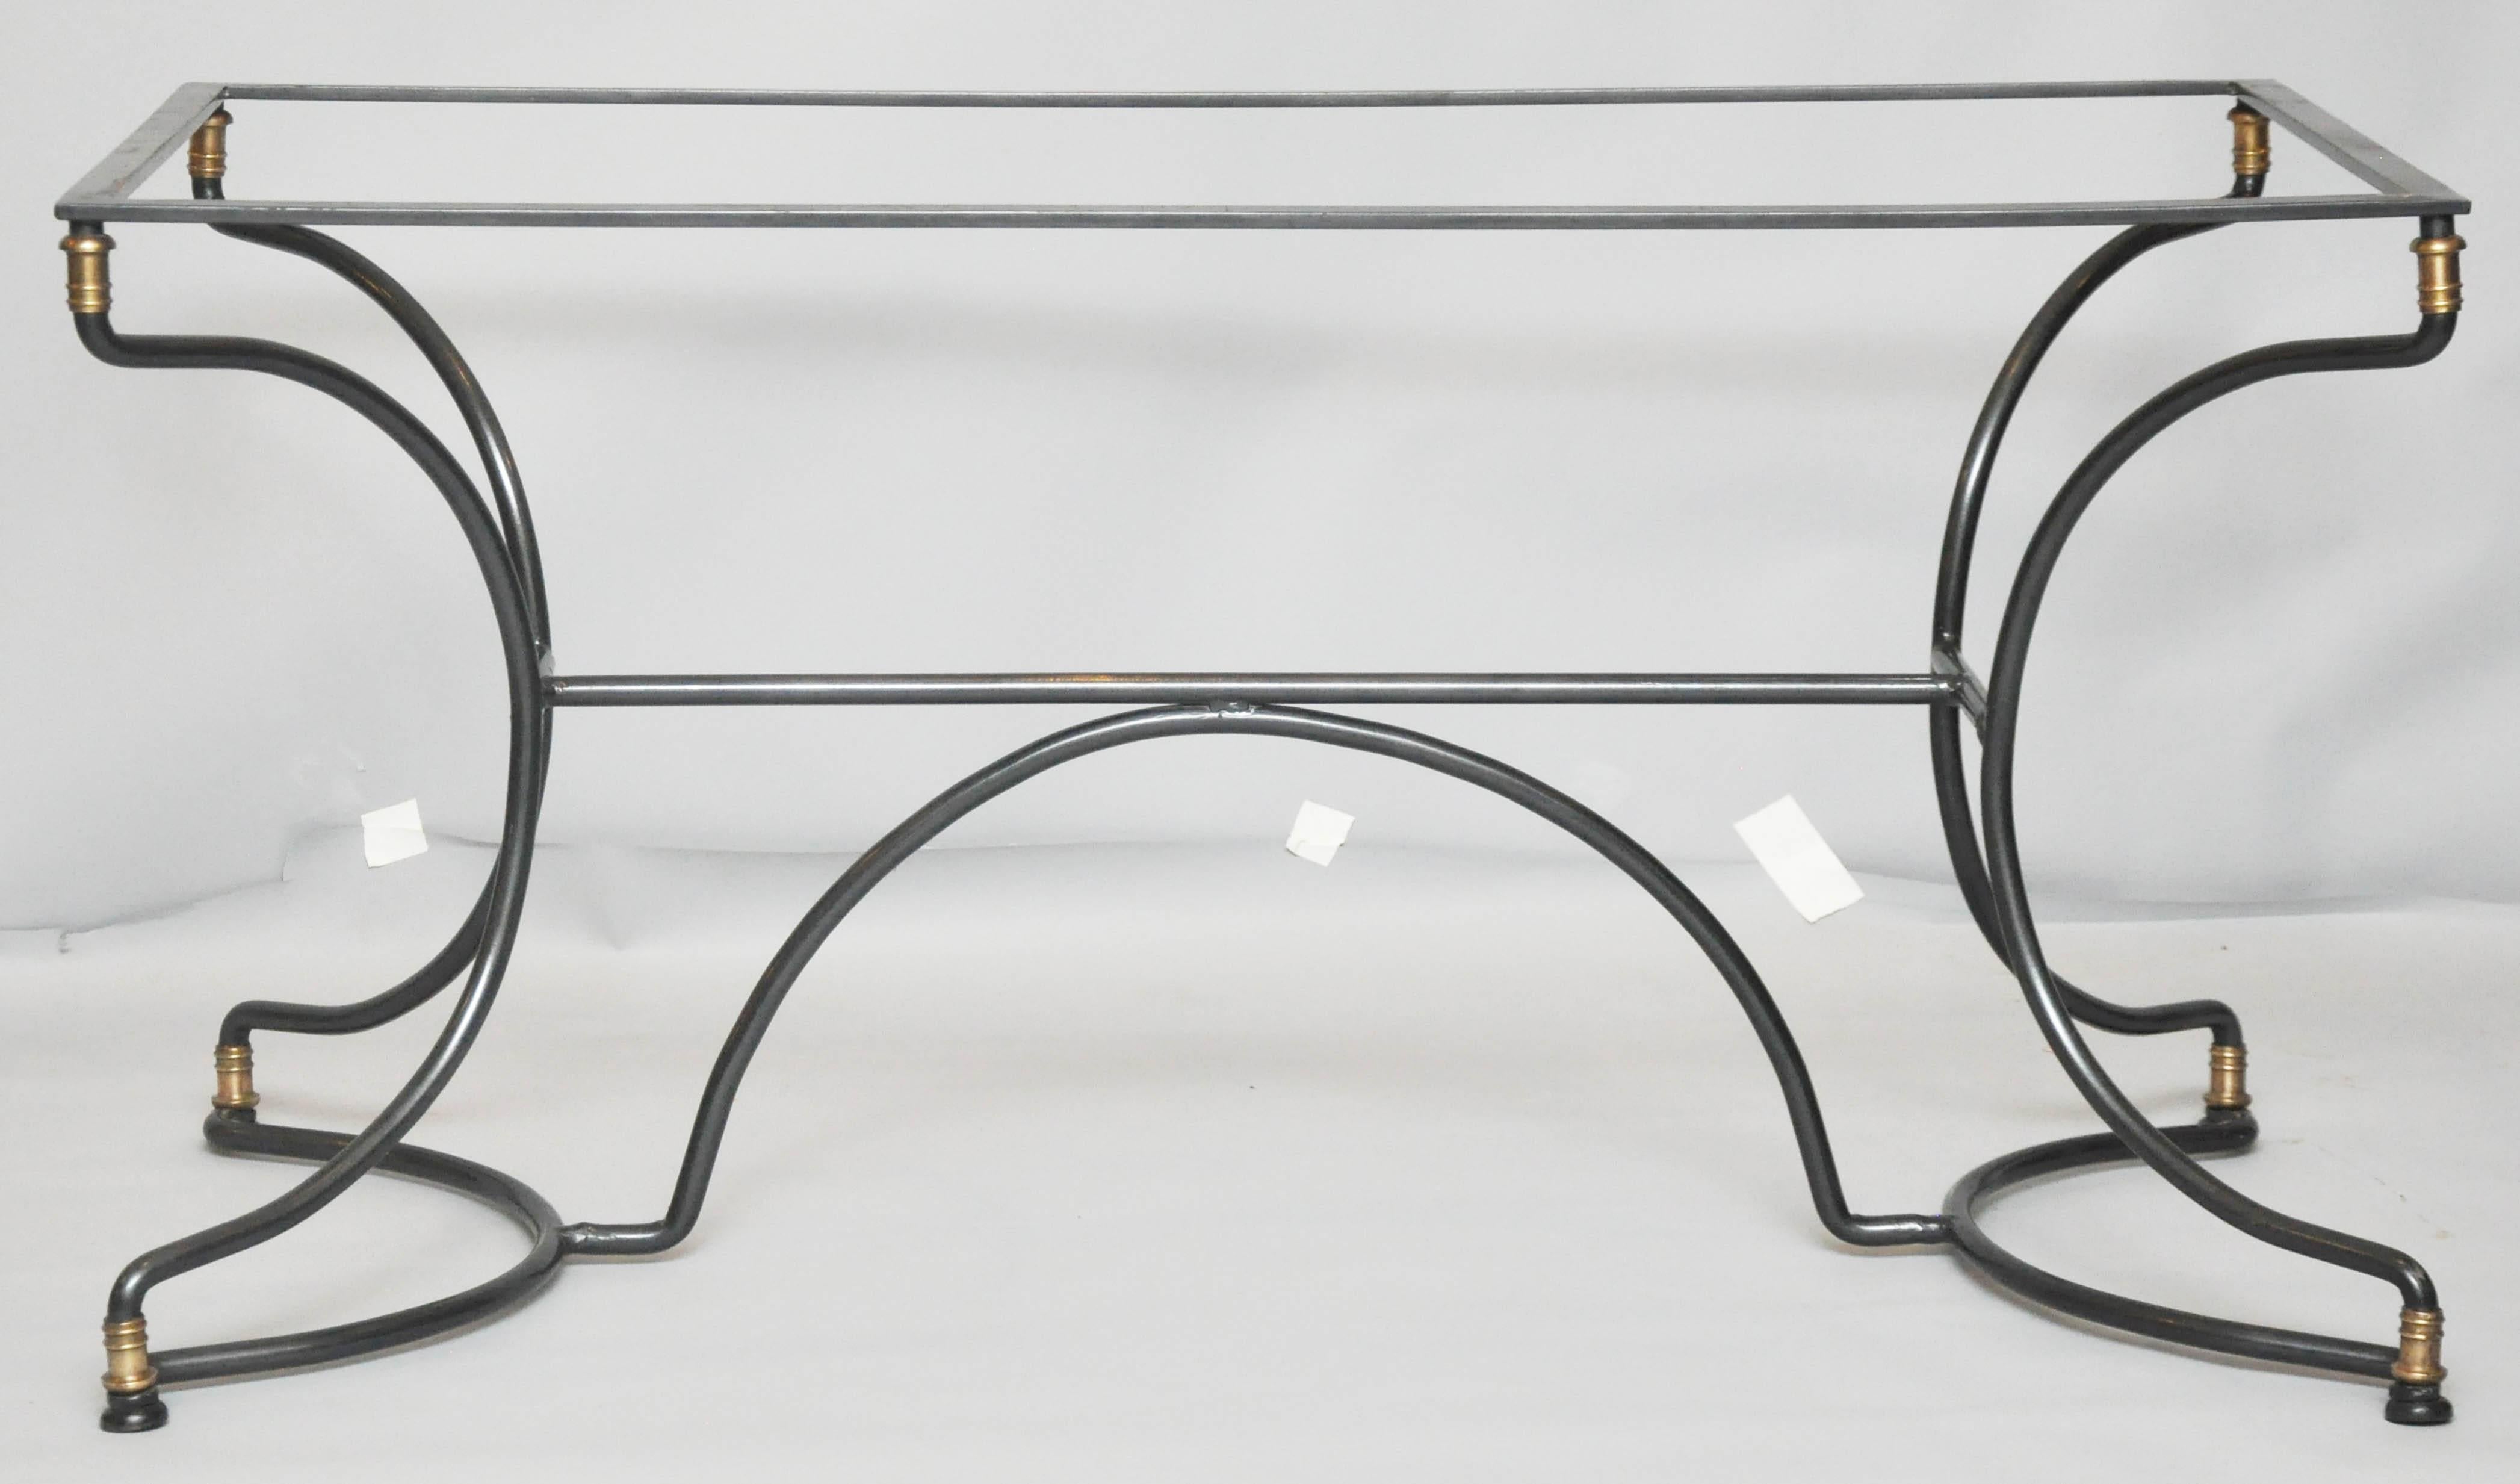 French Art Deco iron cafe table, rectangular form and can use custom sized glass or marble top. Clean geometric shaped base with brass ornaments at crown and foot.

             